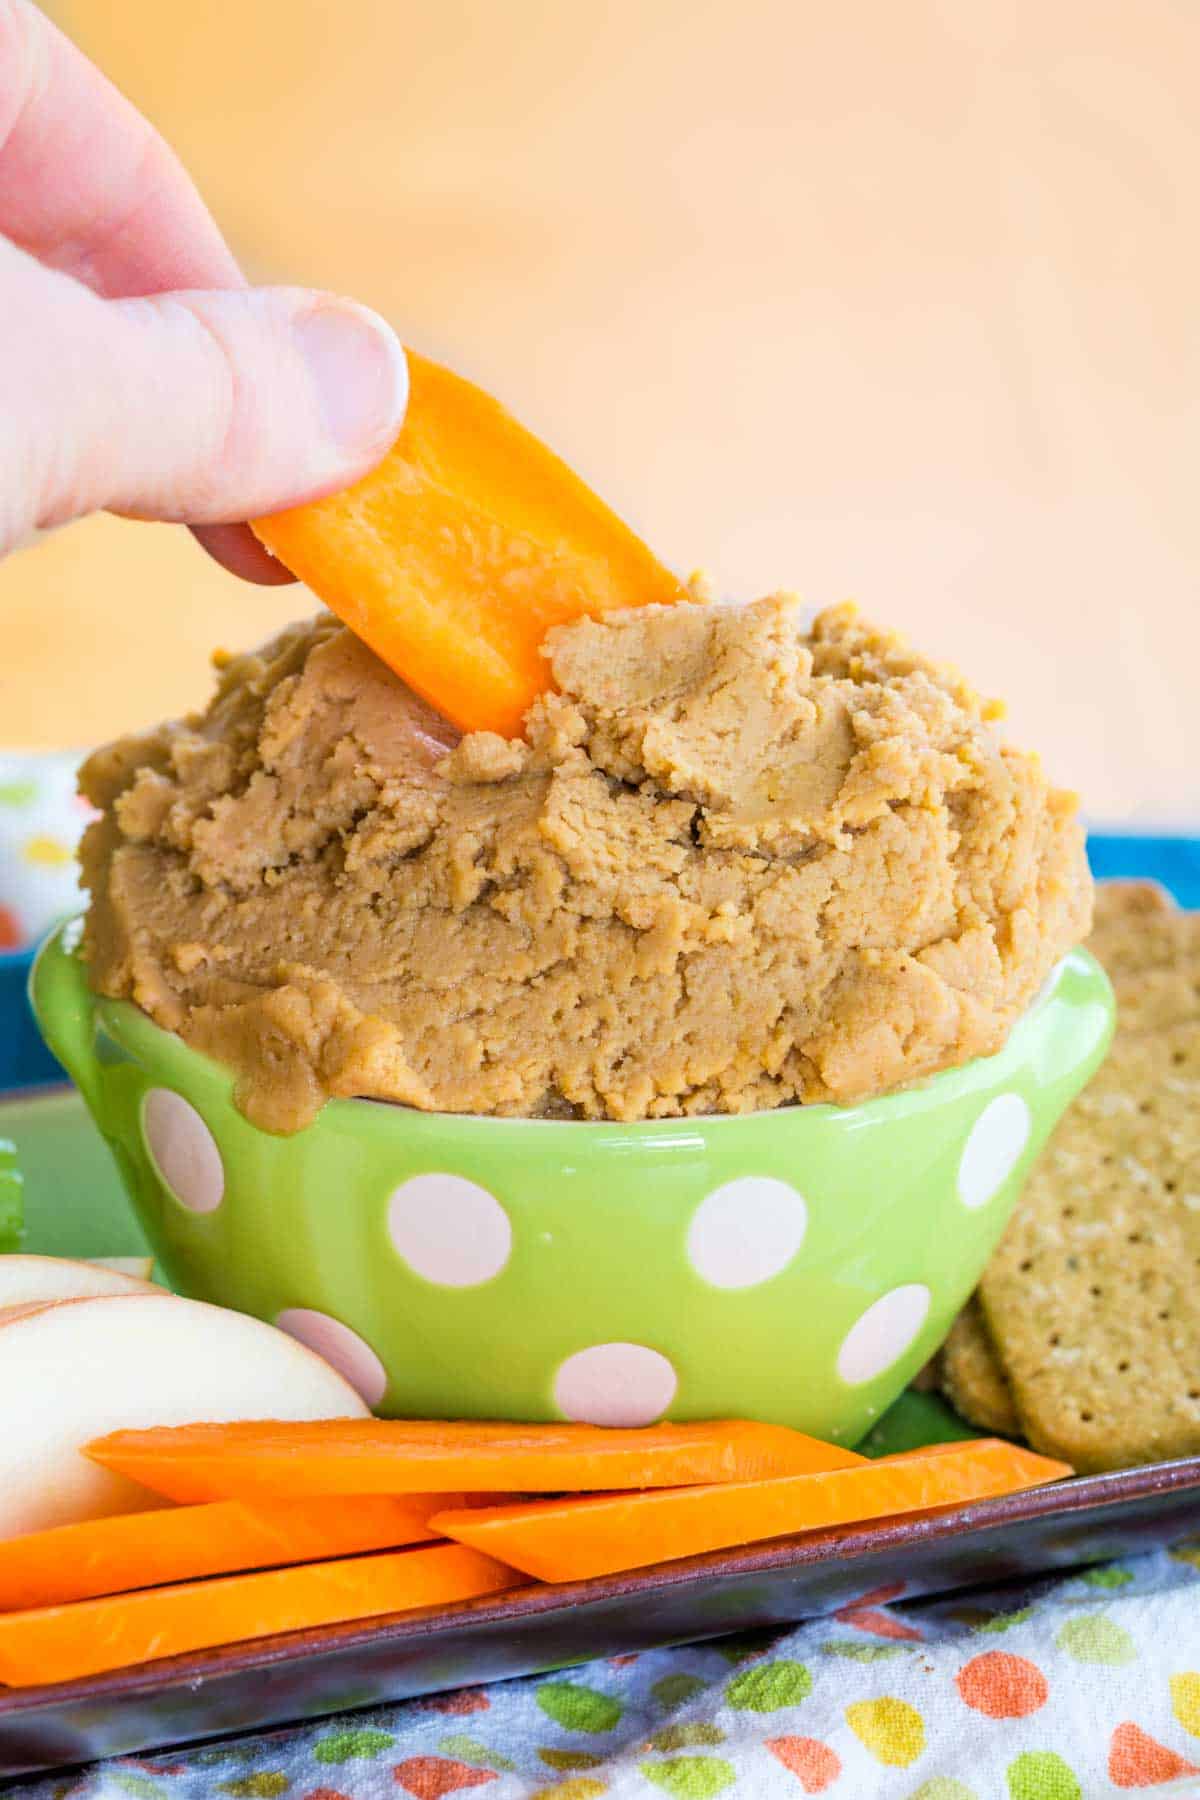 A hand dipping a carrot slice into a bowl of Sweet Peanut Butter Hummus.